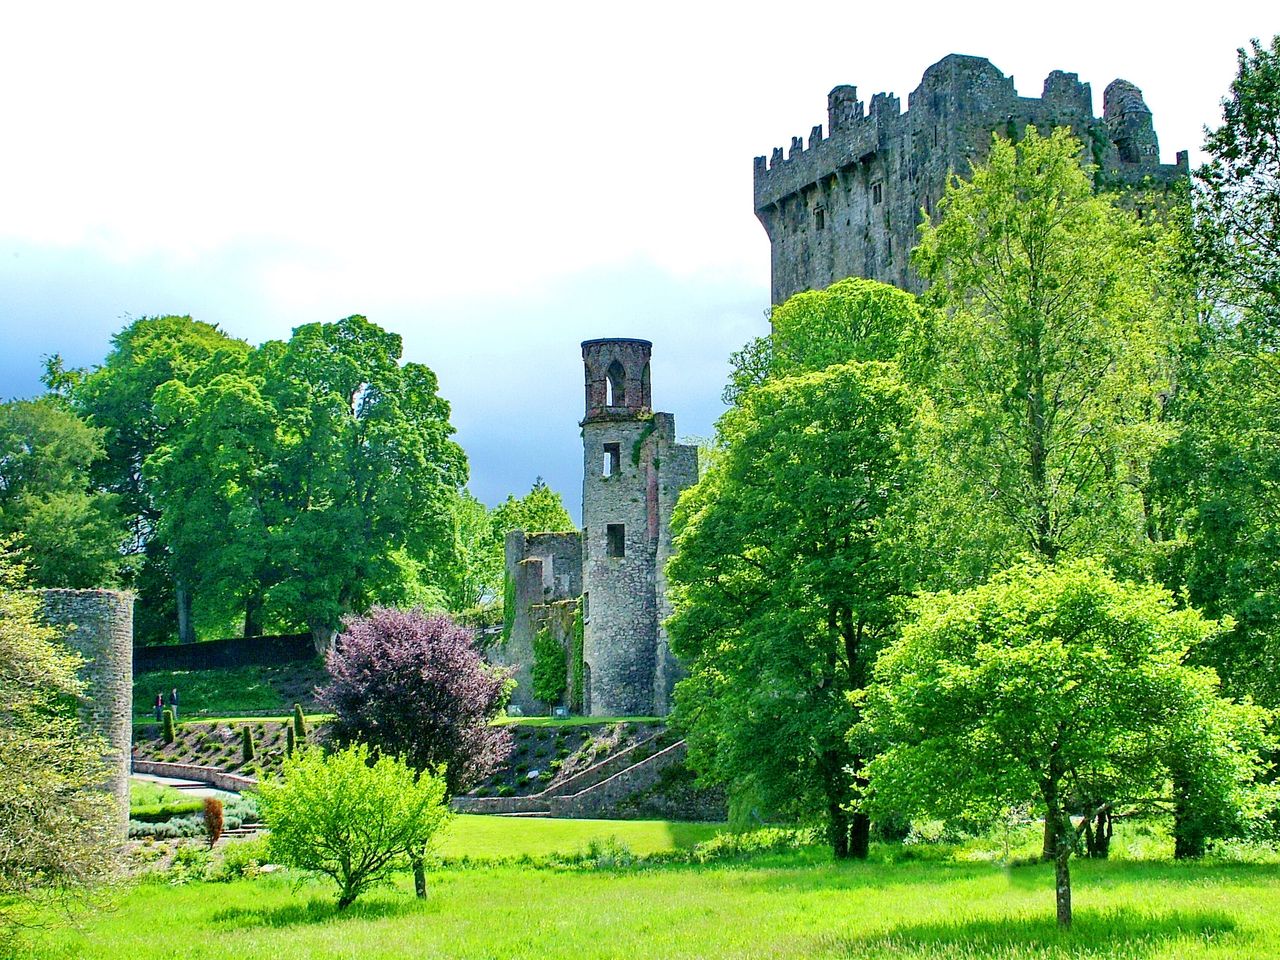 Cork, Ireland - May 30, 2012: Blarney Castle is a medieval castle near Cork, Ireland. The castle is famous for holding the Blarney Stone.